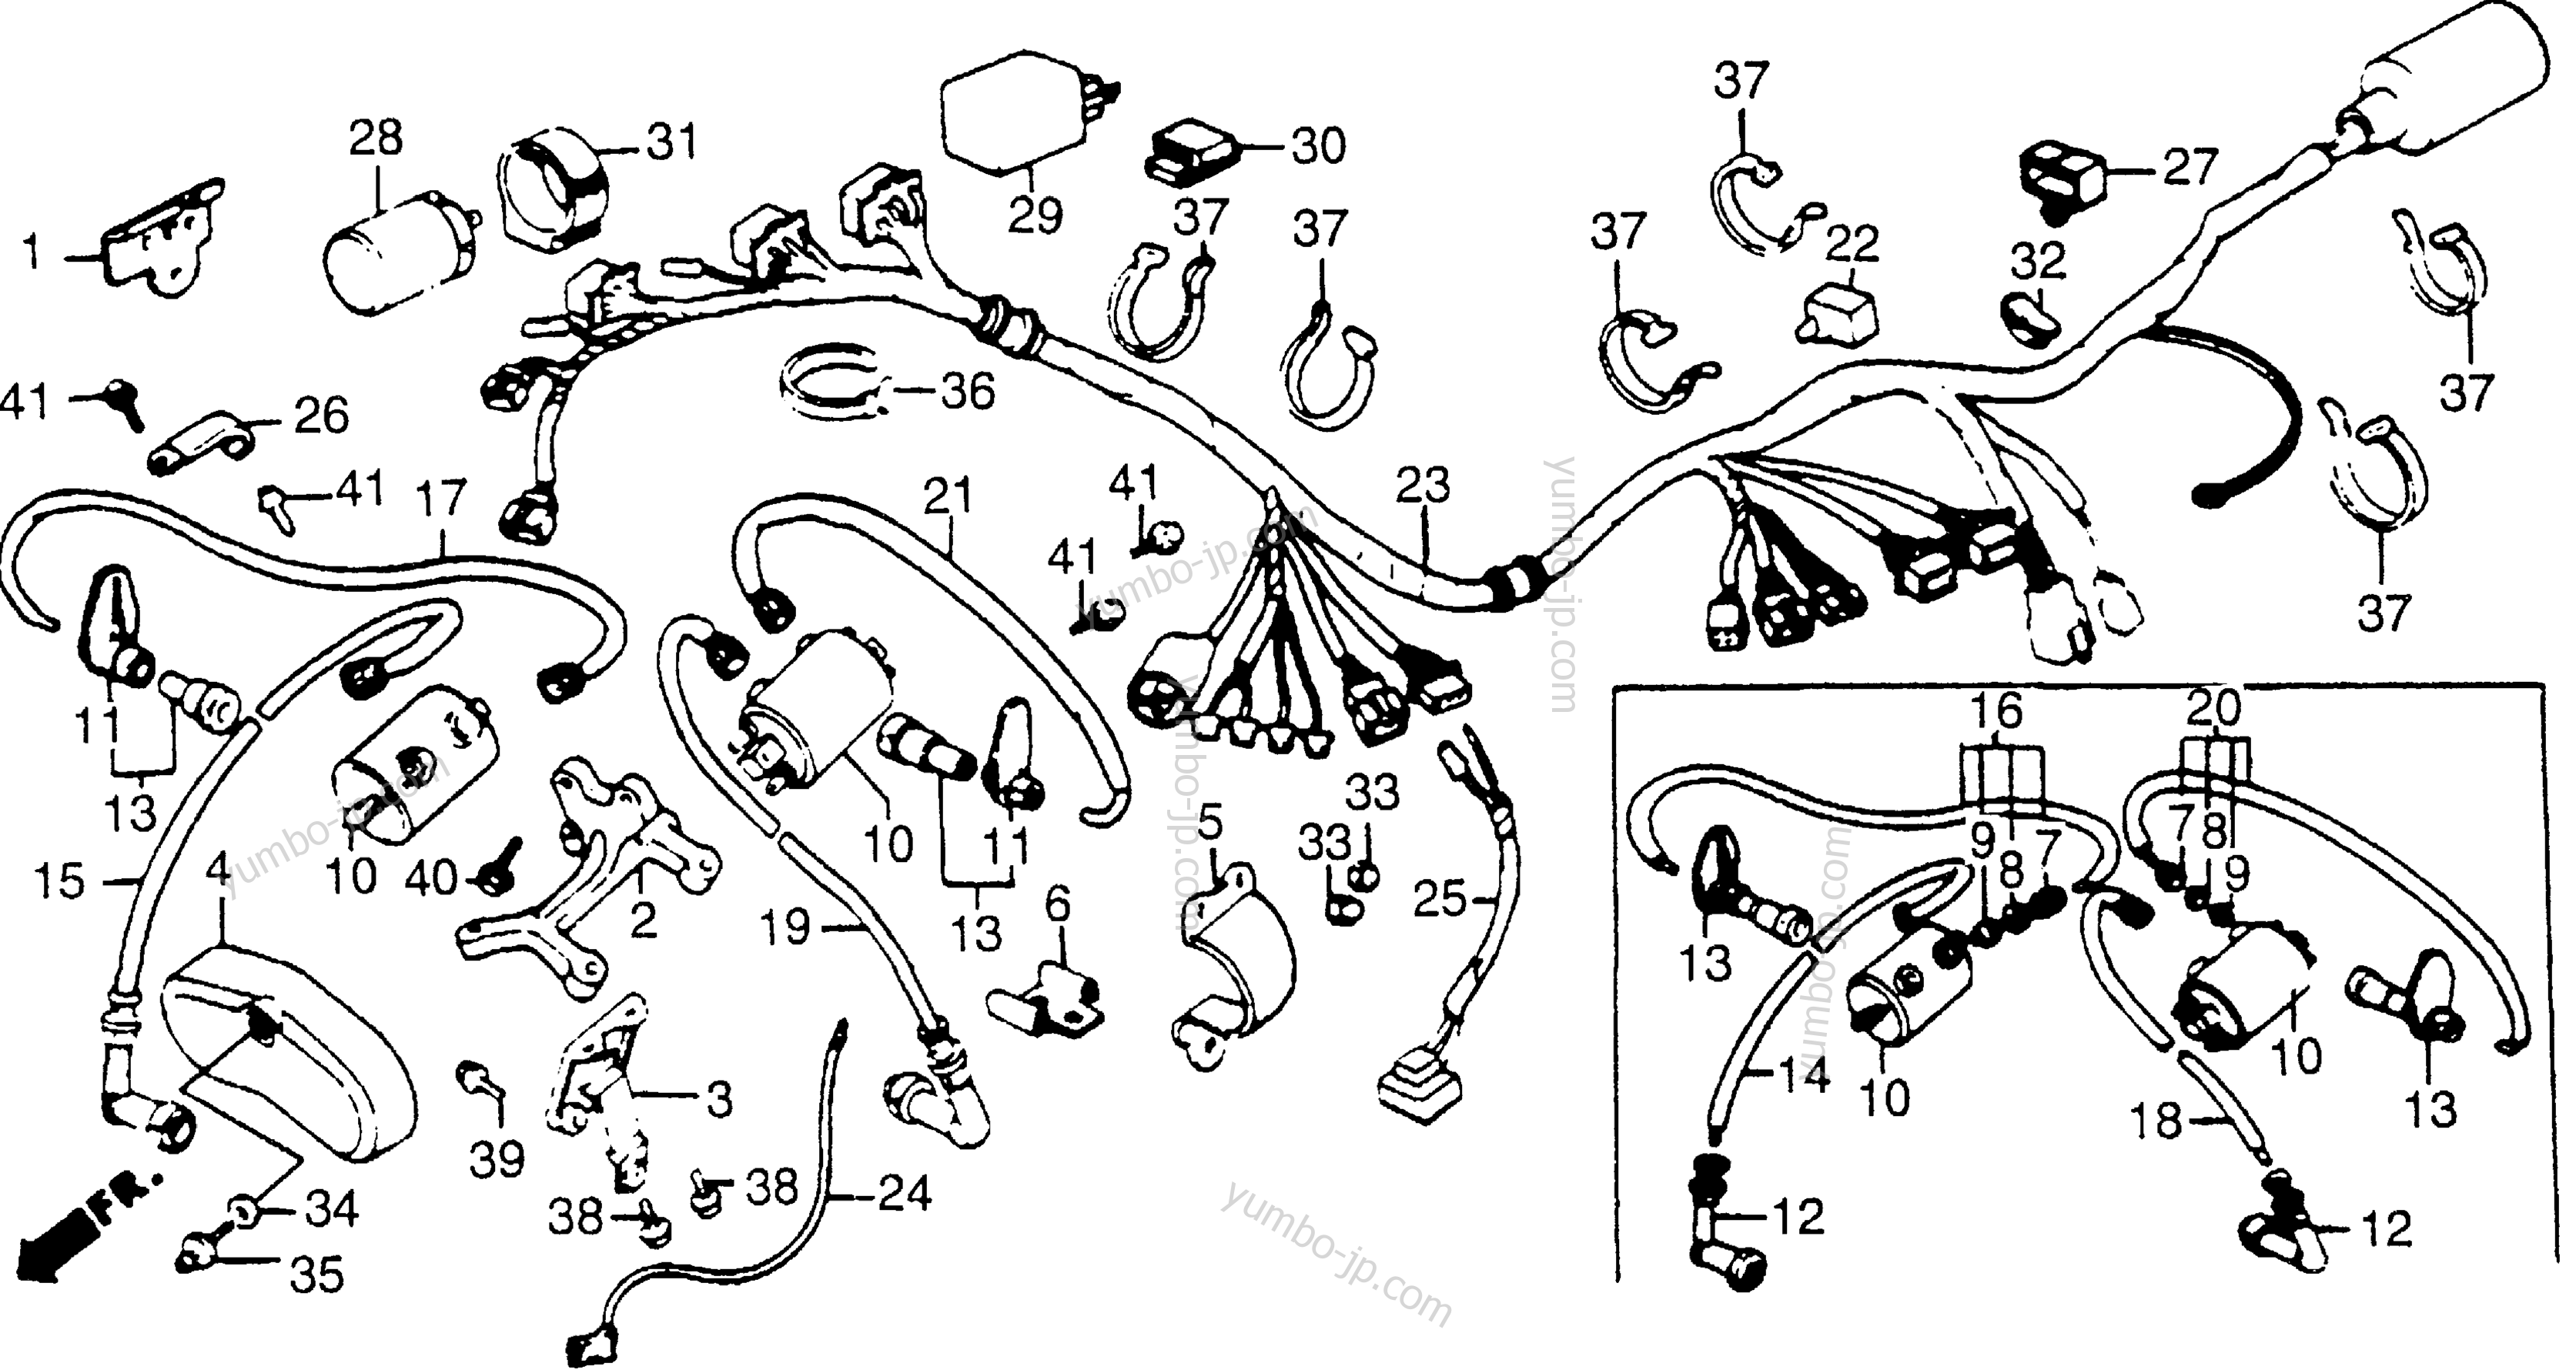 WIRE HARNESS for motorcycles HONDA VT500C A 1986 year